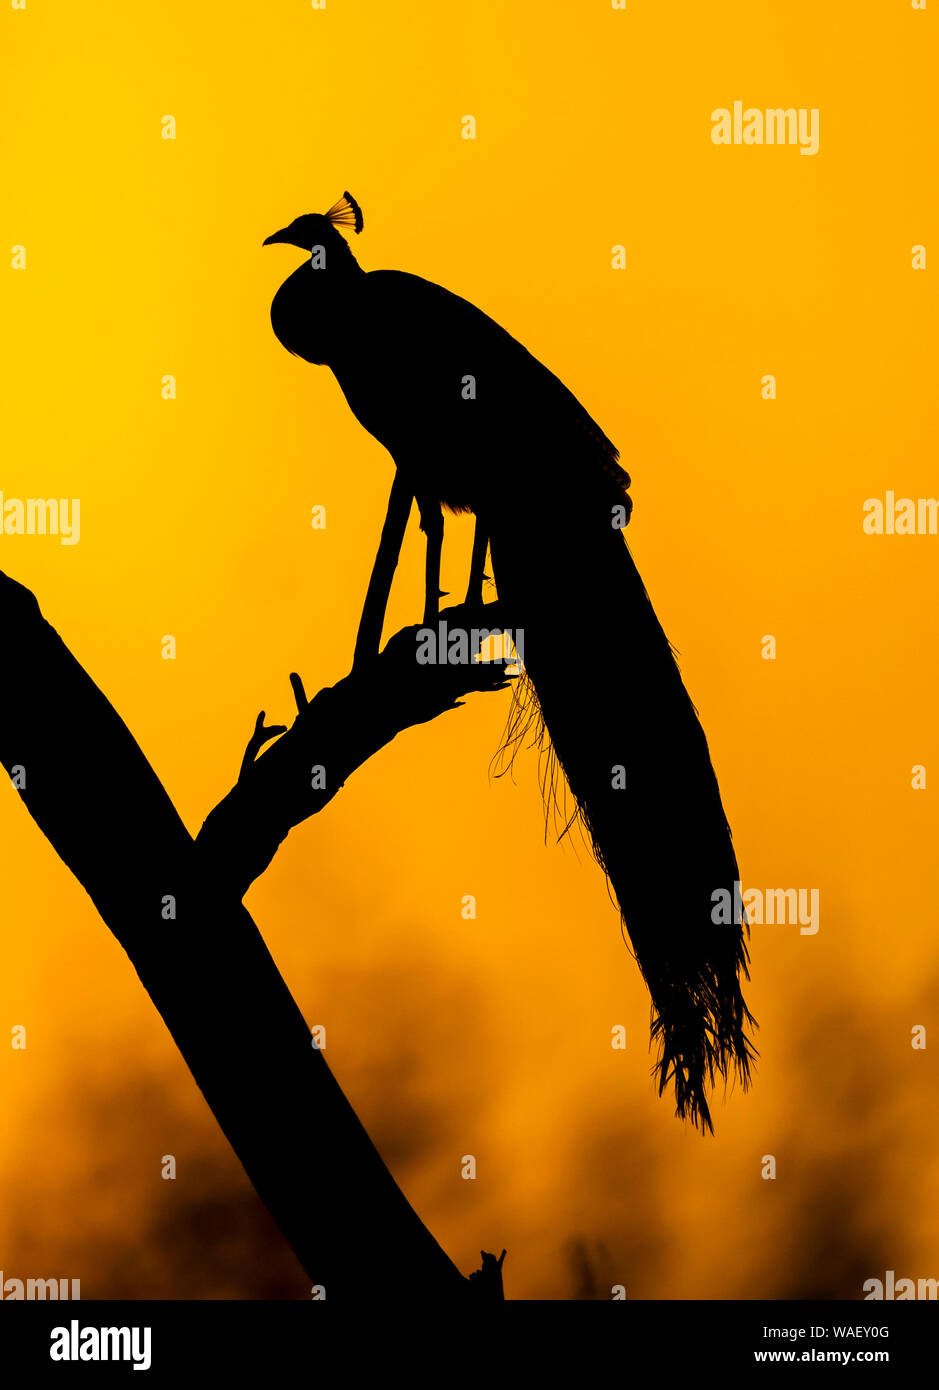 Peacock silhoutte, Bharatpur, Rajasthan, India. Stock Photo